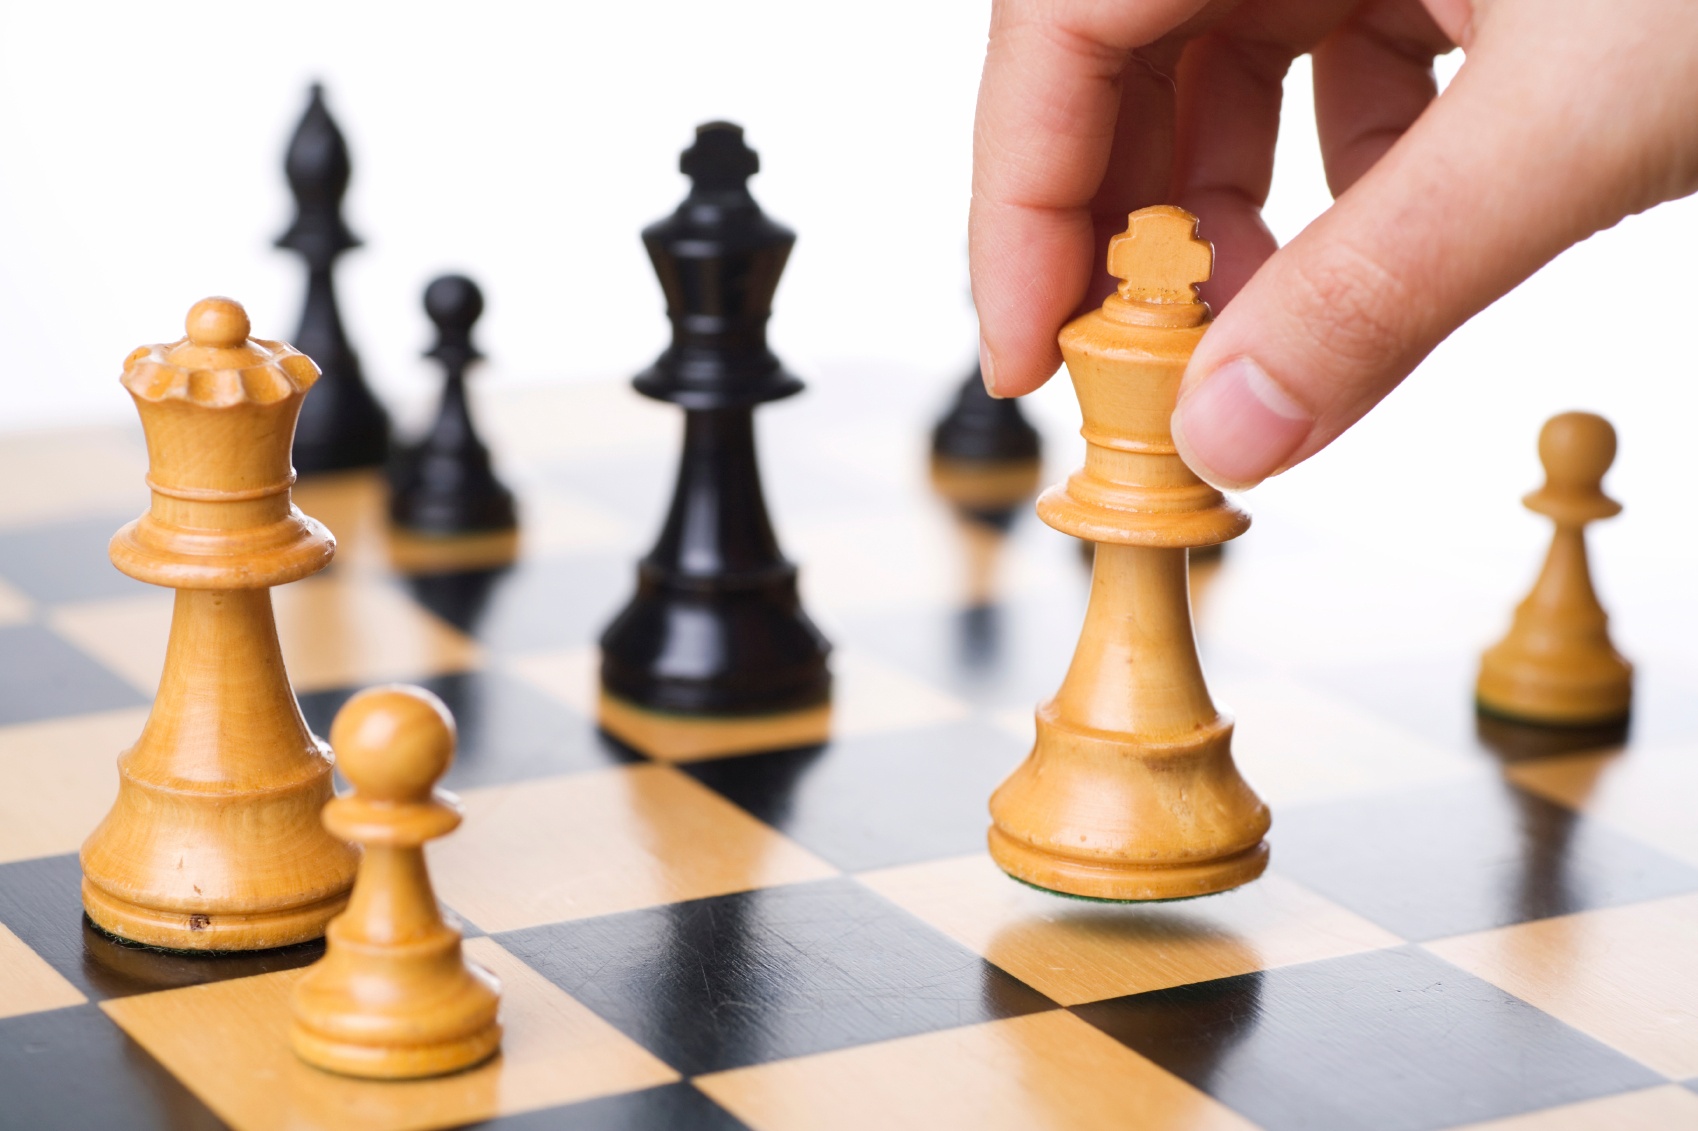 Chess is challenging and has many moves just like relationships